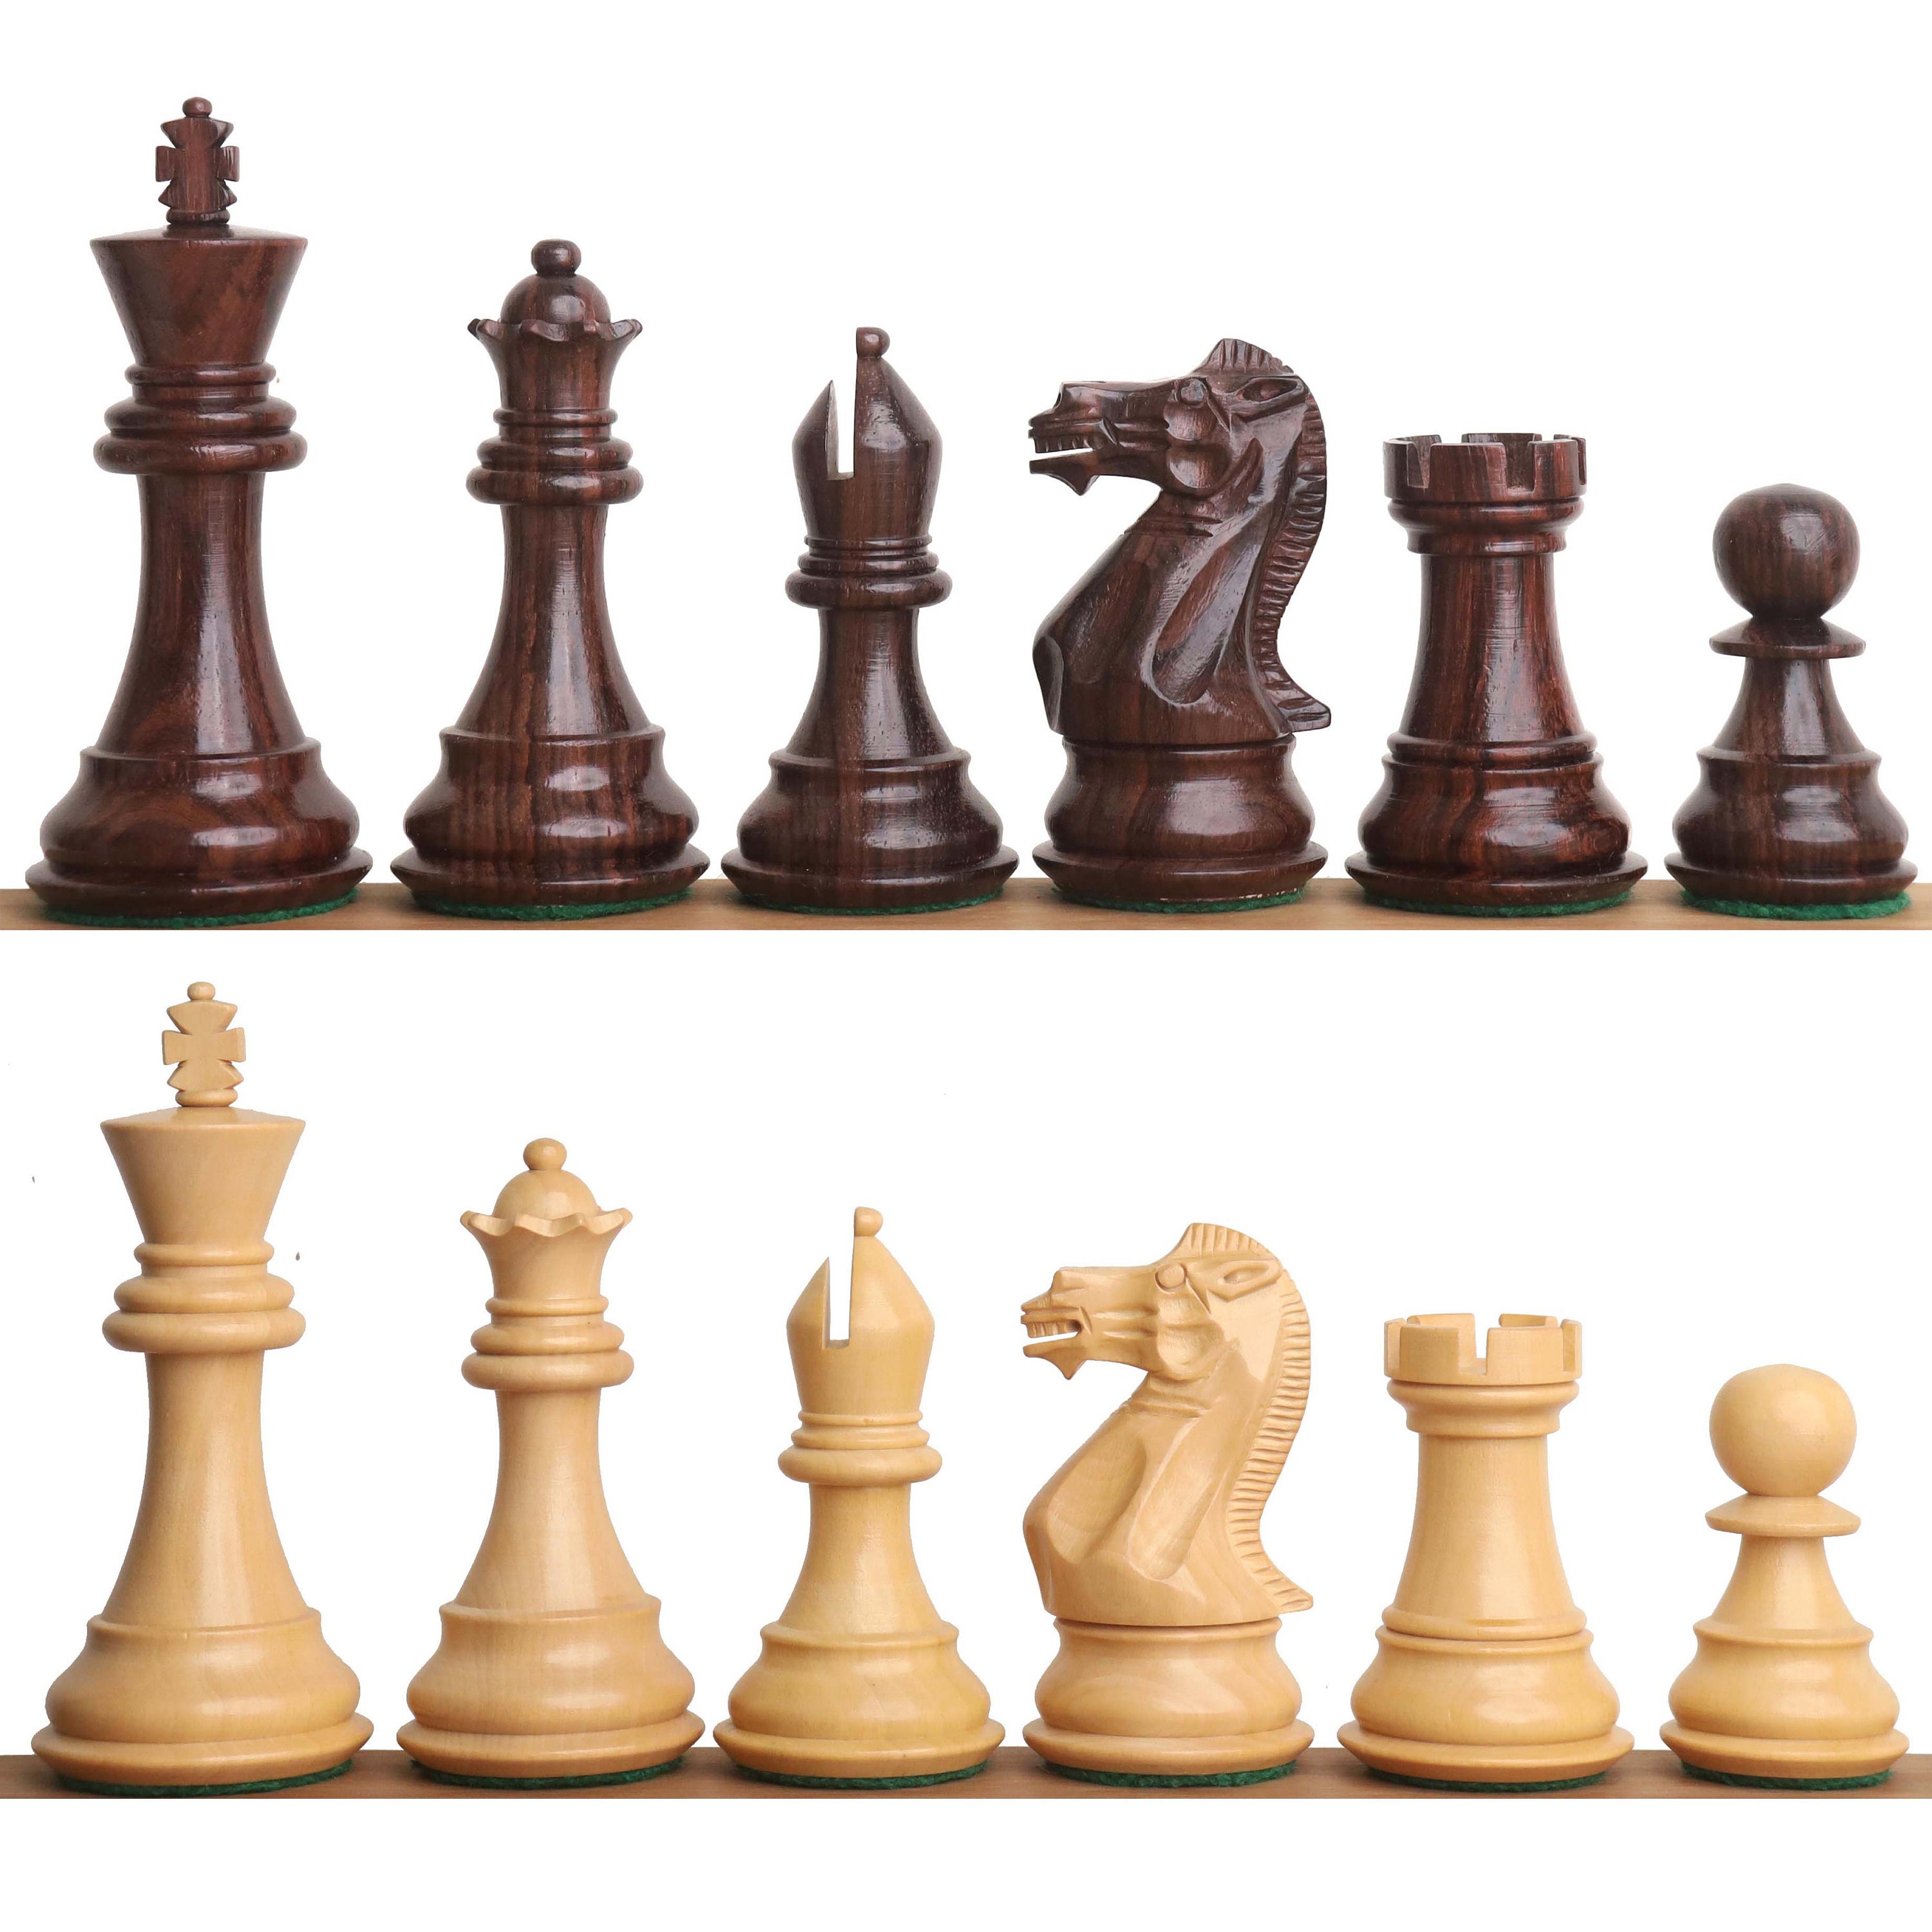 Get Tournament Chess board with coordinates from Chessbazaar